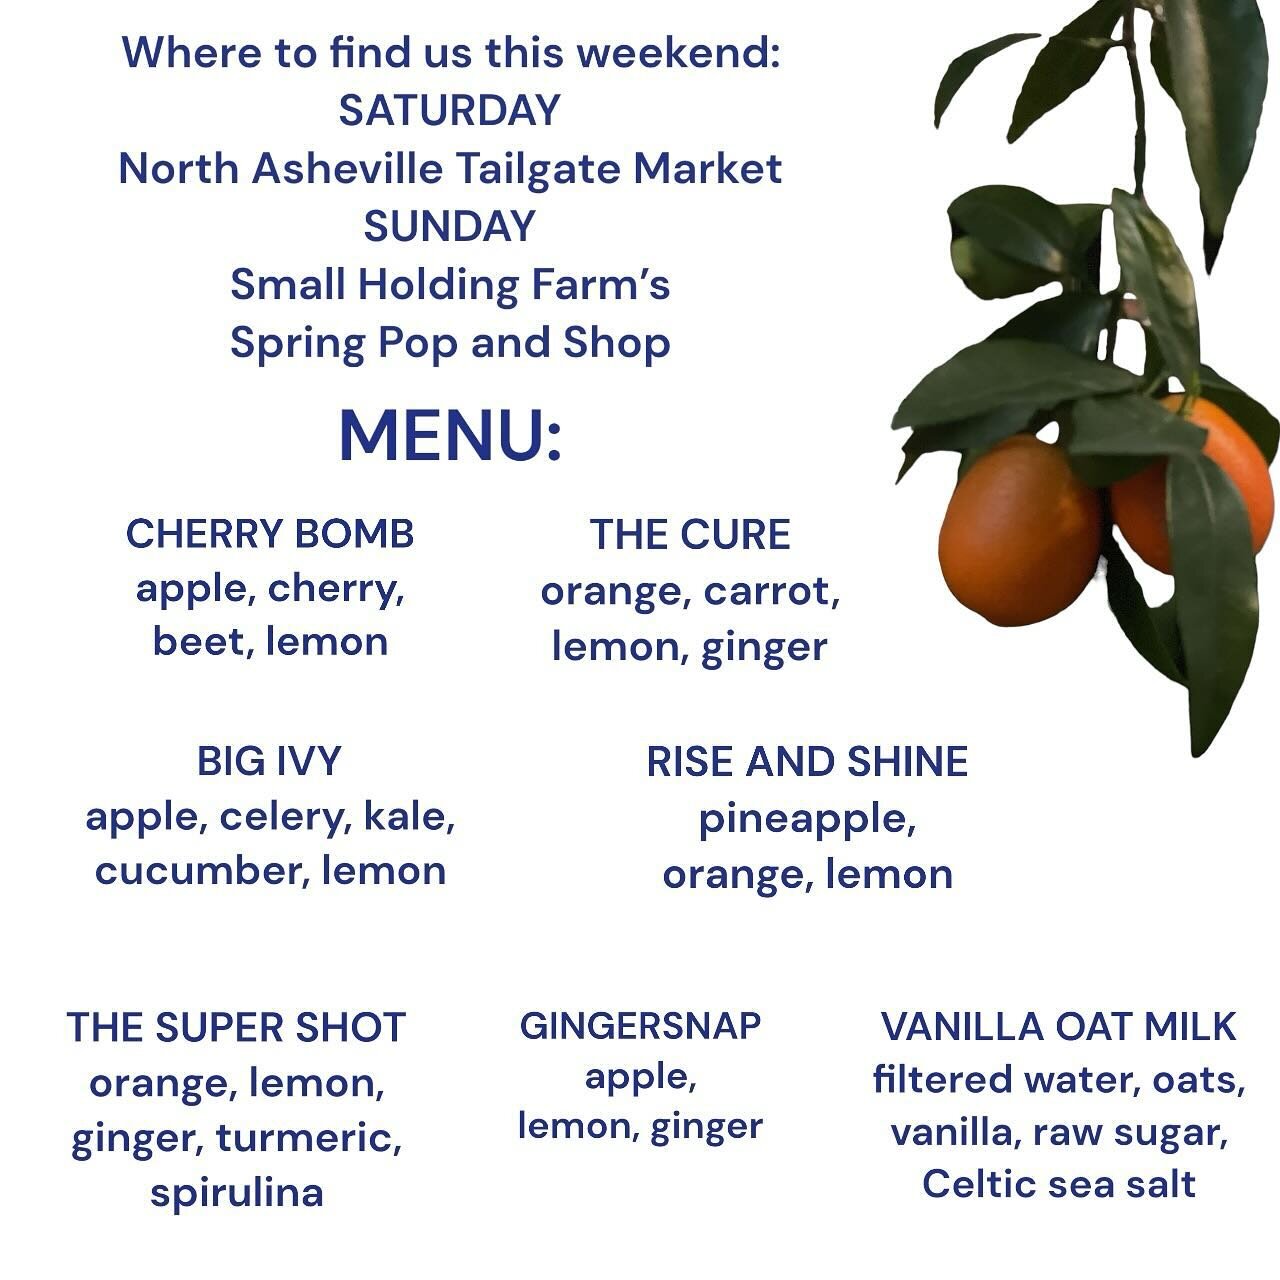 Here&rsquo;s this weekend&rsquo;s menu! We will be @northashevilletailgatemarket from 10 am - 1 pm on Saturday and @smallholdingfarm Spring Pop and Shop from 11 am - 4 pm on Sunday. Shoot us a message to preorder. See y&rsquo;all this weekend!